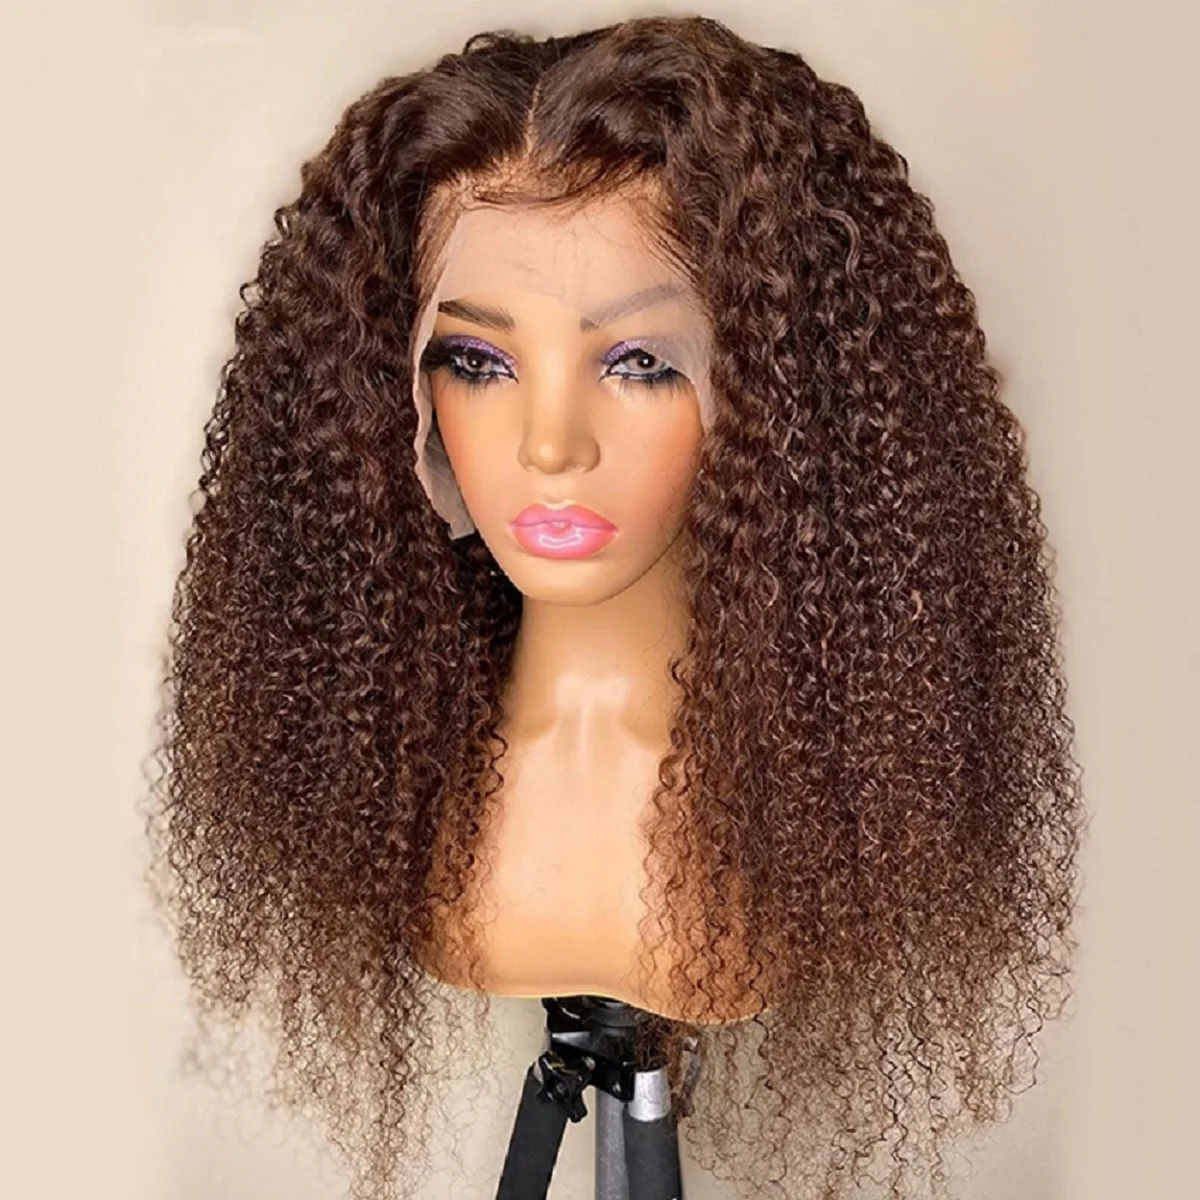 Dark Brown Kinky Curly 13x4 Lace Frontal Wigs Brazilian Remy Lace Front Human Hair Wigs Dark Brown 180% Density Full Curly Wigs